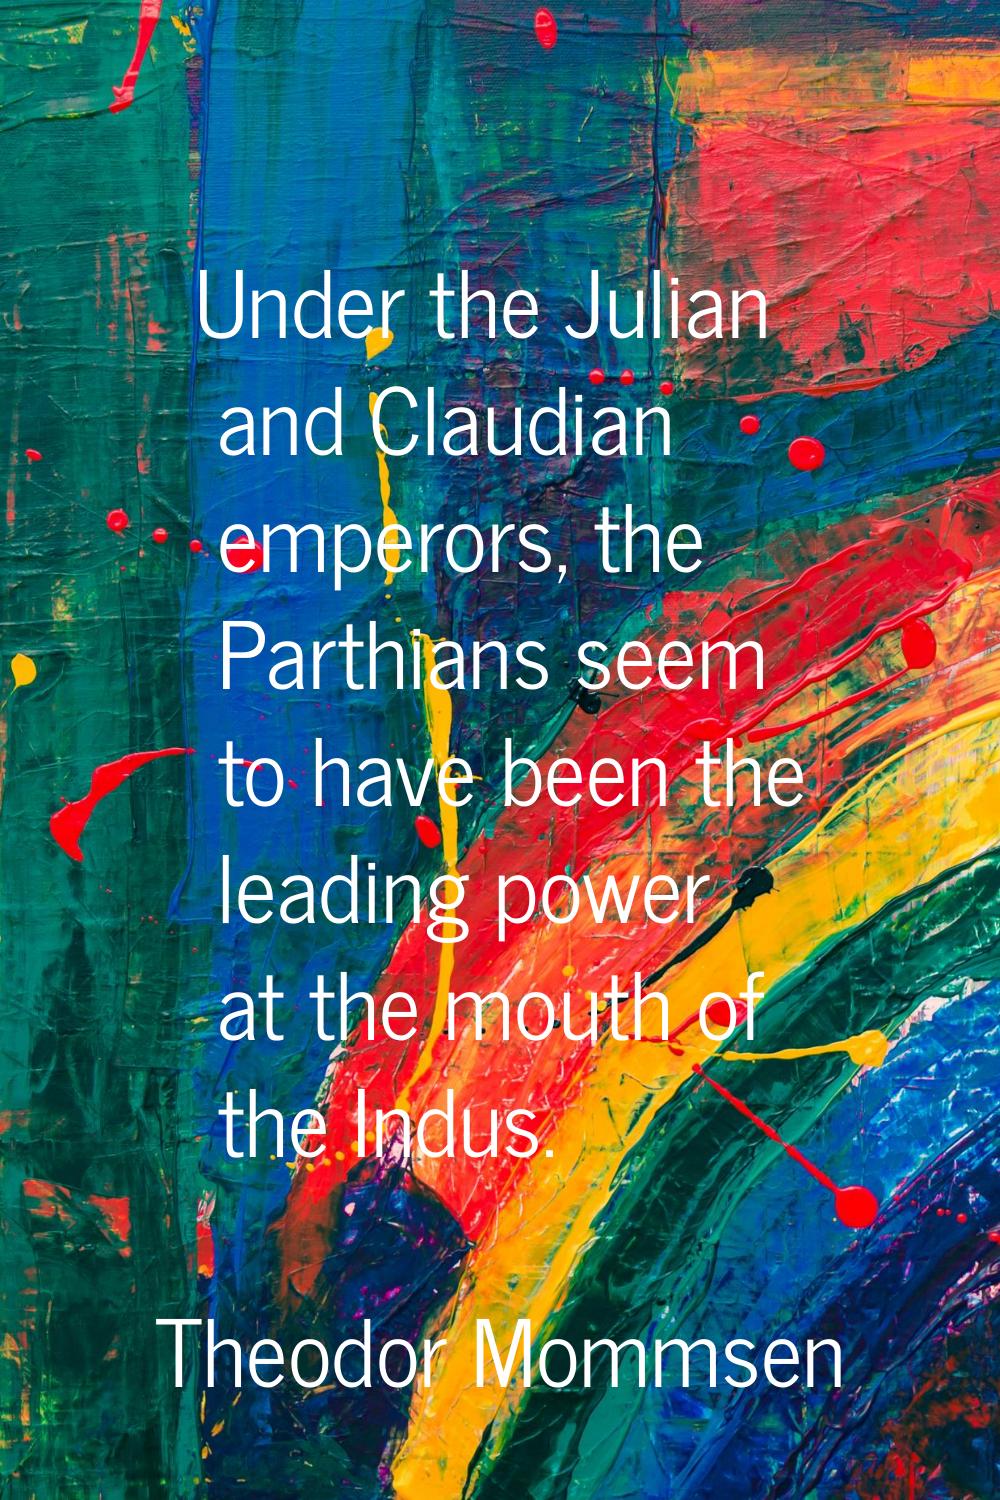 Under the Julian and Claudian emperors, the Parthians seem to have been the leading power at the mo